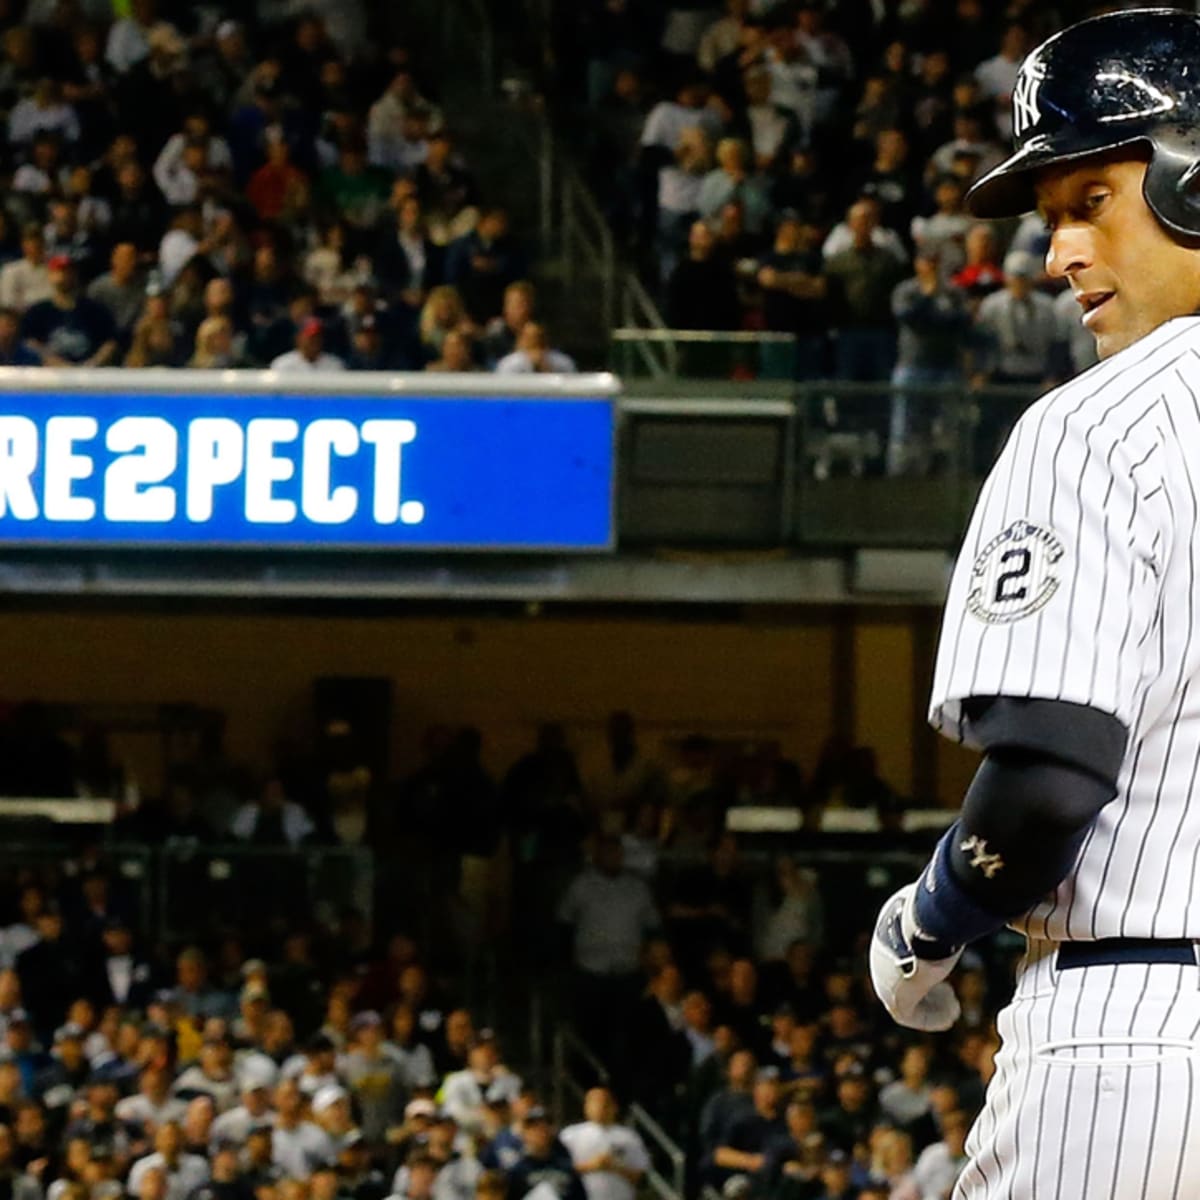 Yankees to retire Derek Jeter's number on May 14 - Sports Illustrated